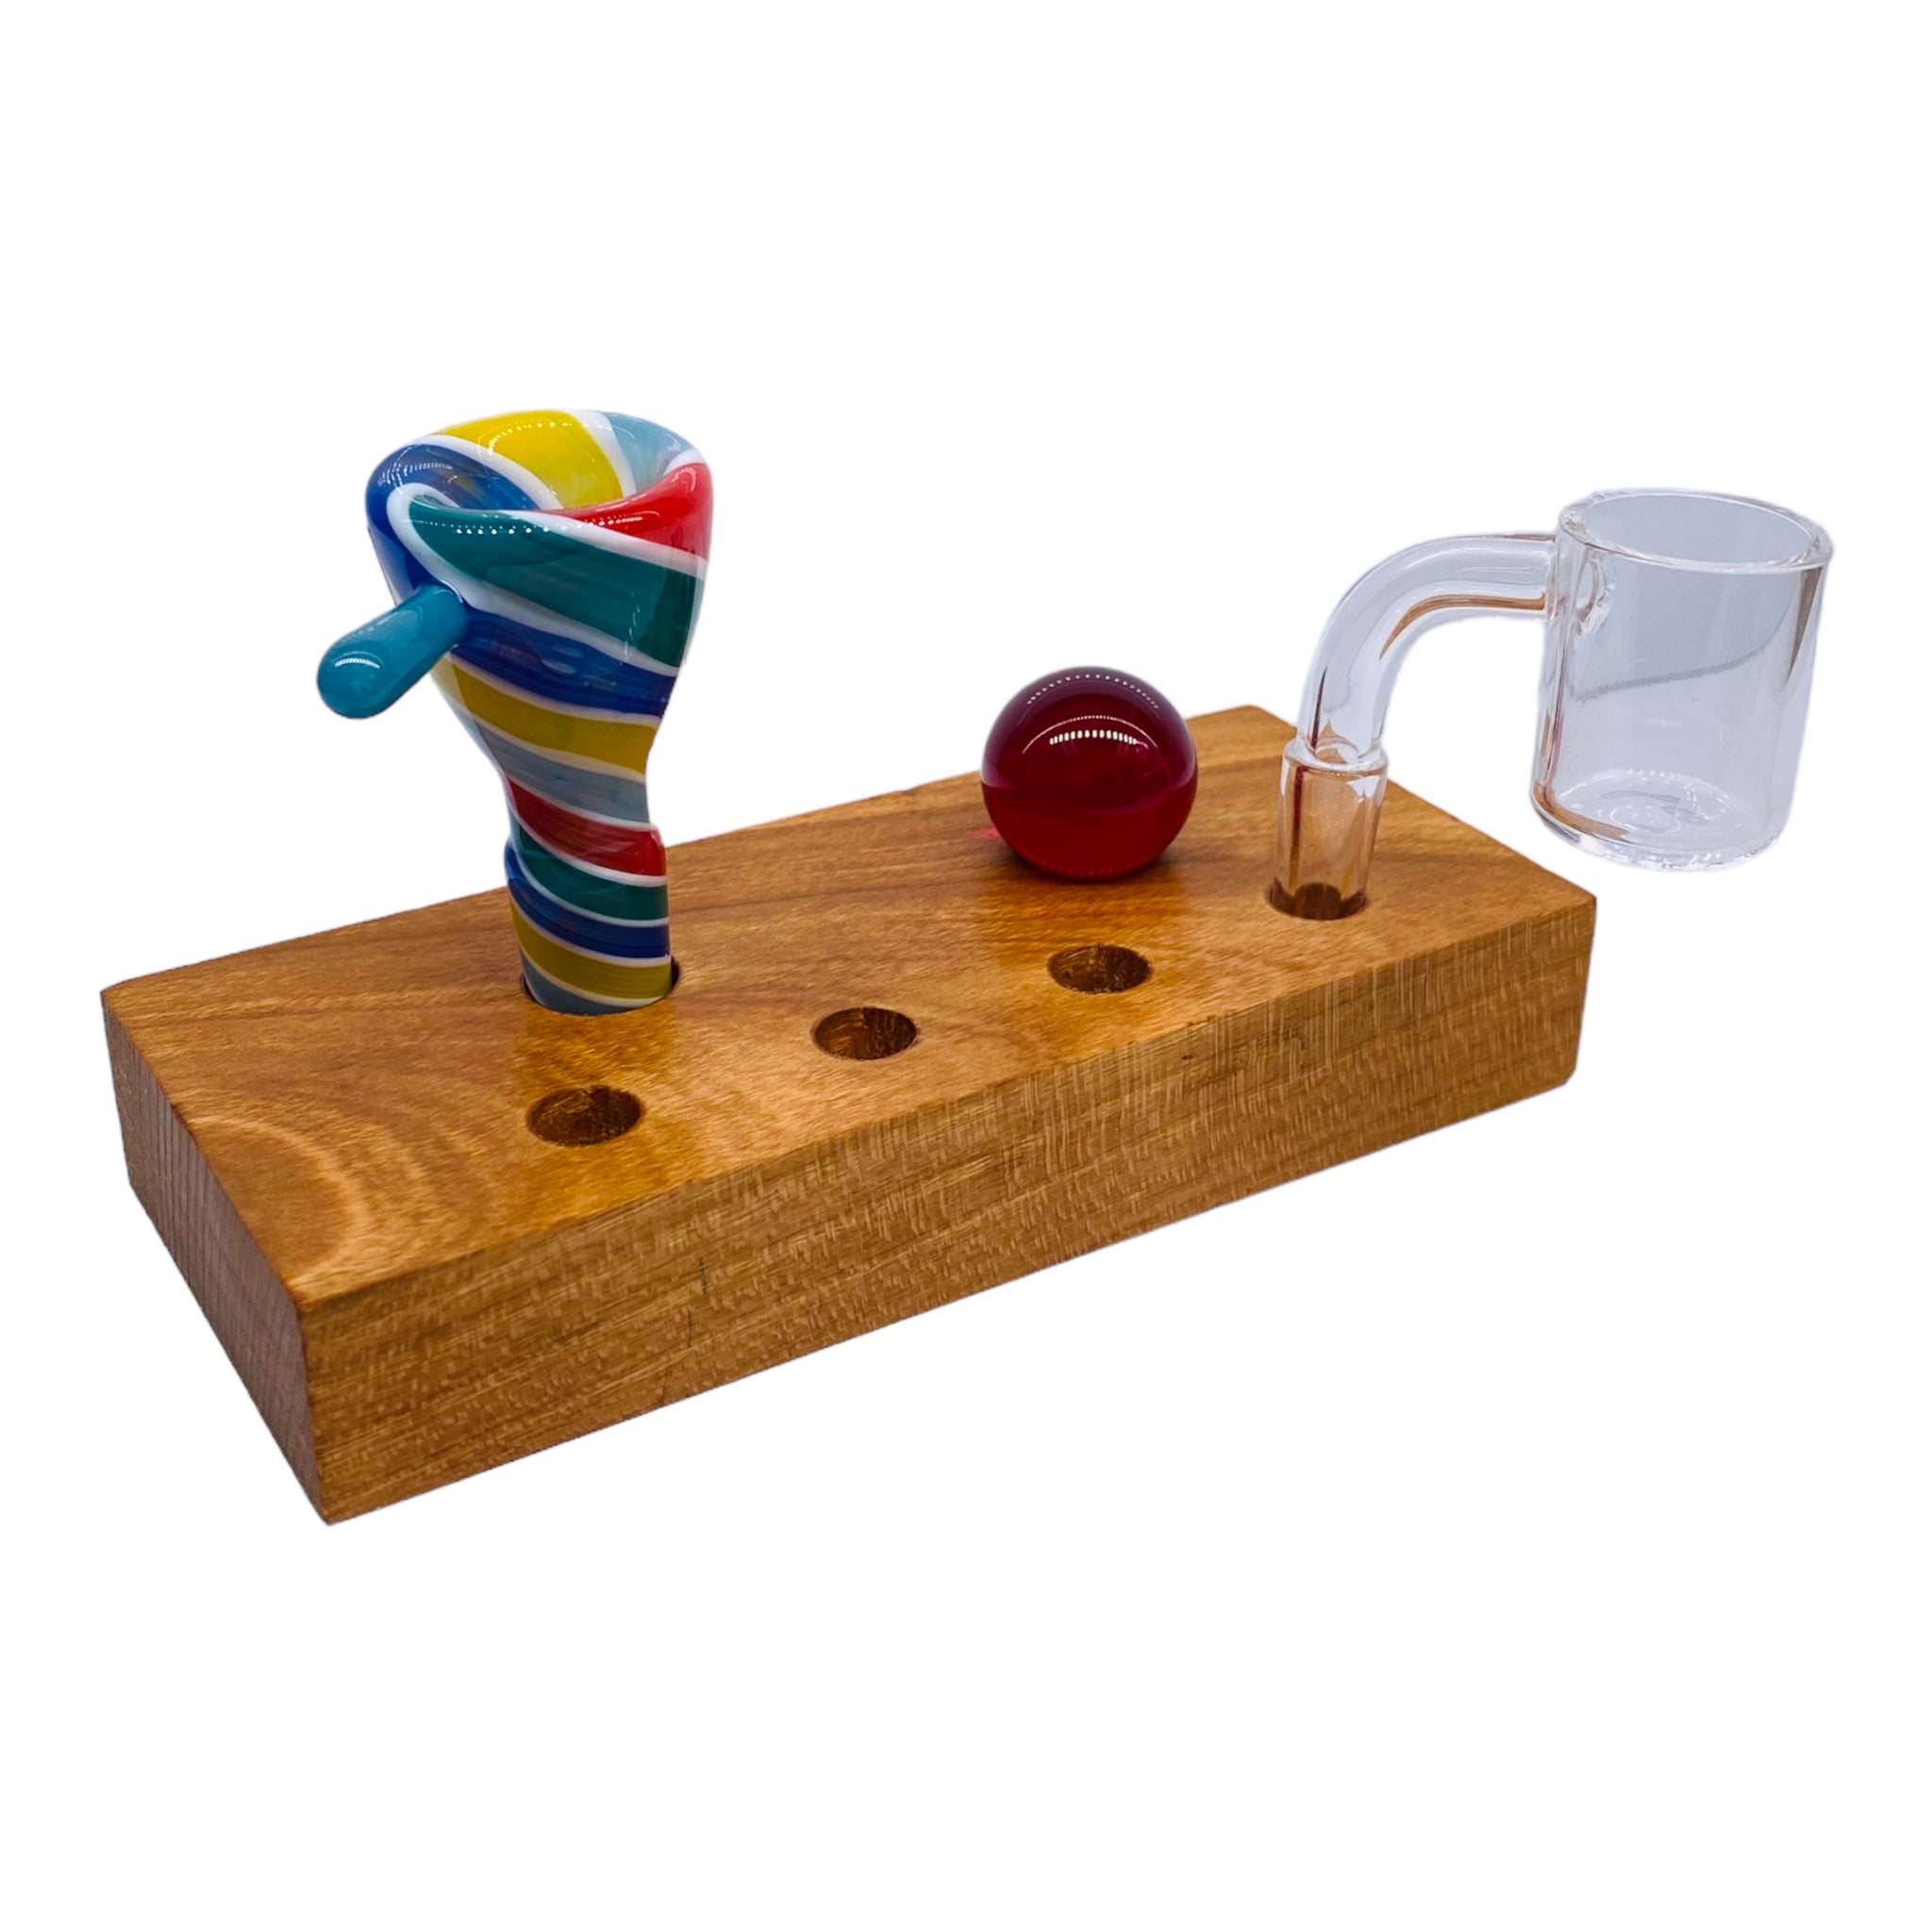 6 Hole Wood Display Stand Holder For 14mm And 10mm Bong Bowl Pieces Or Quartz Bangers made from cherry hardwood